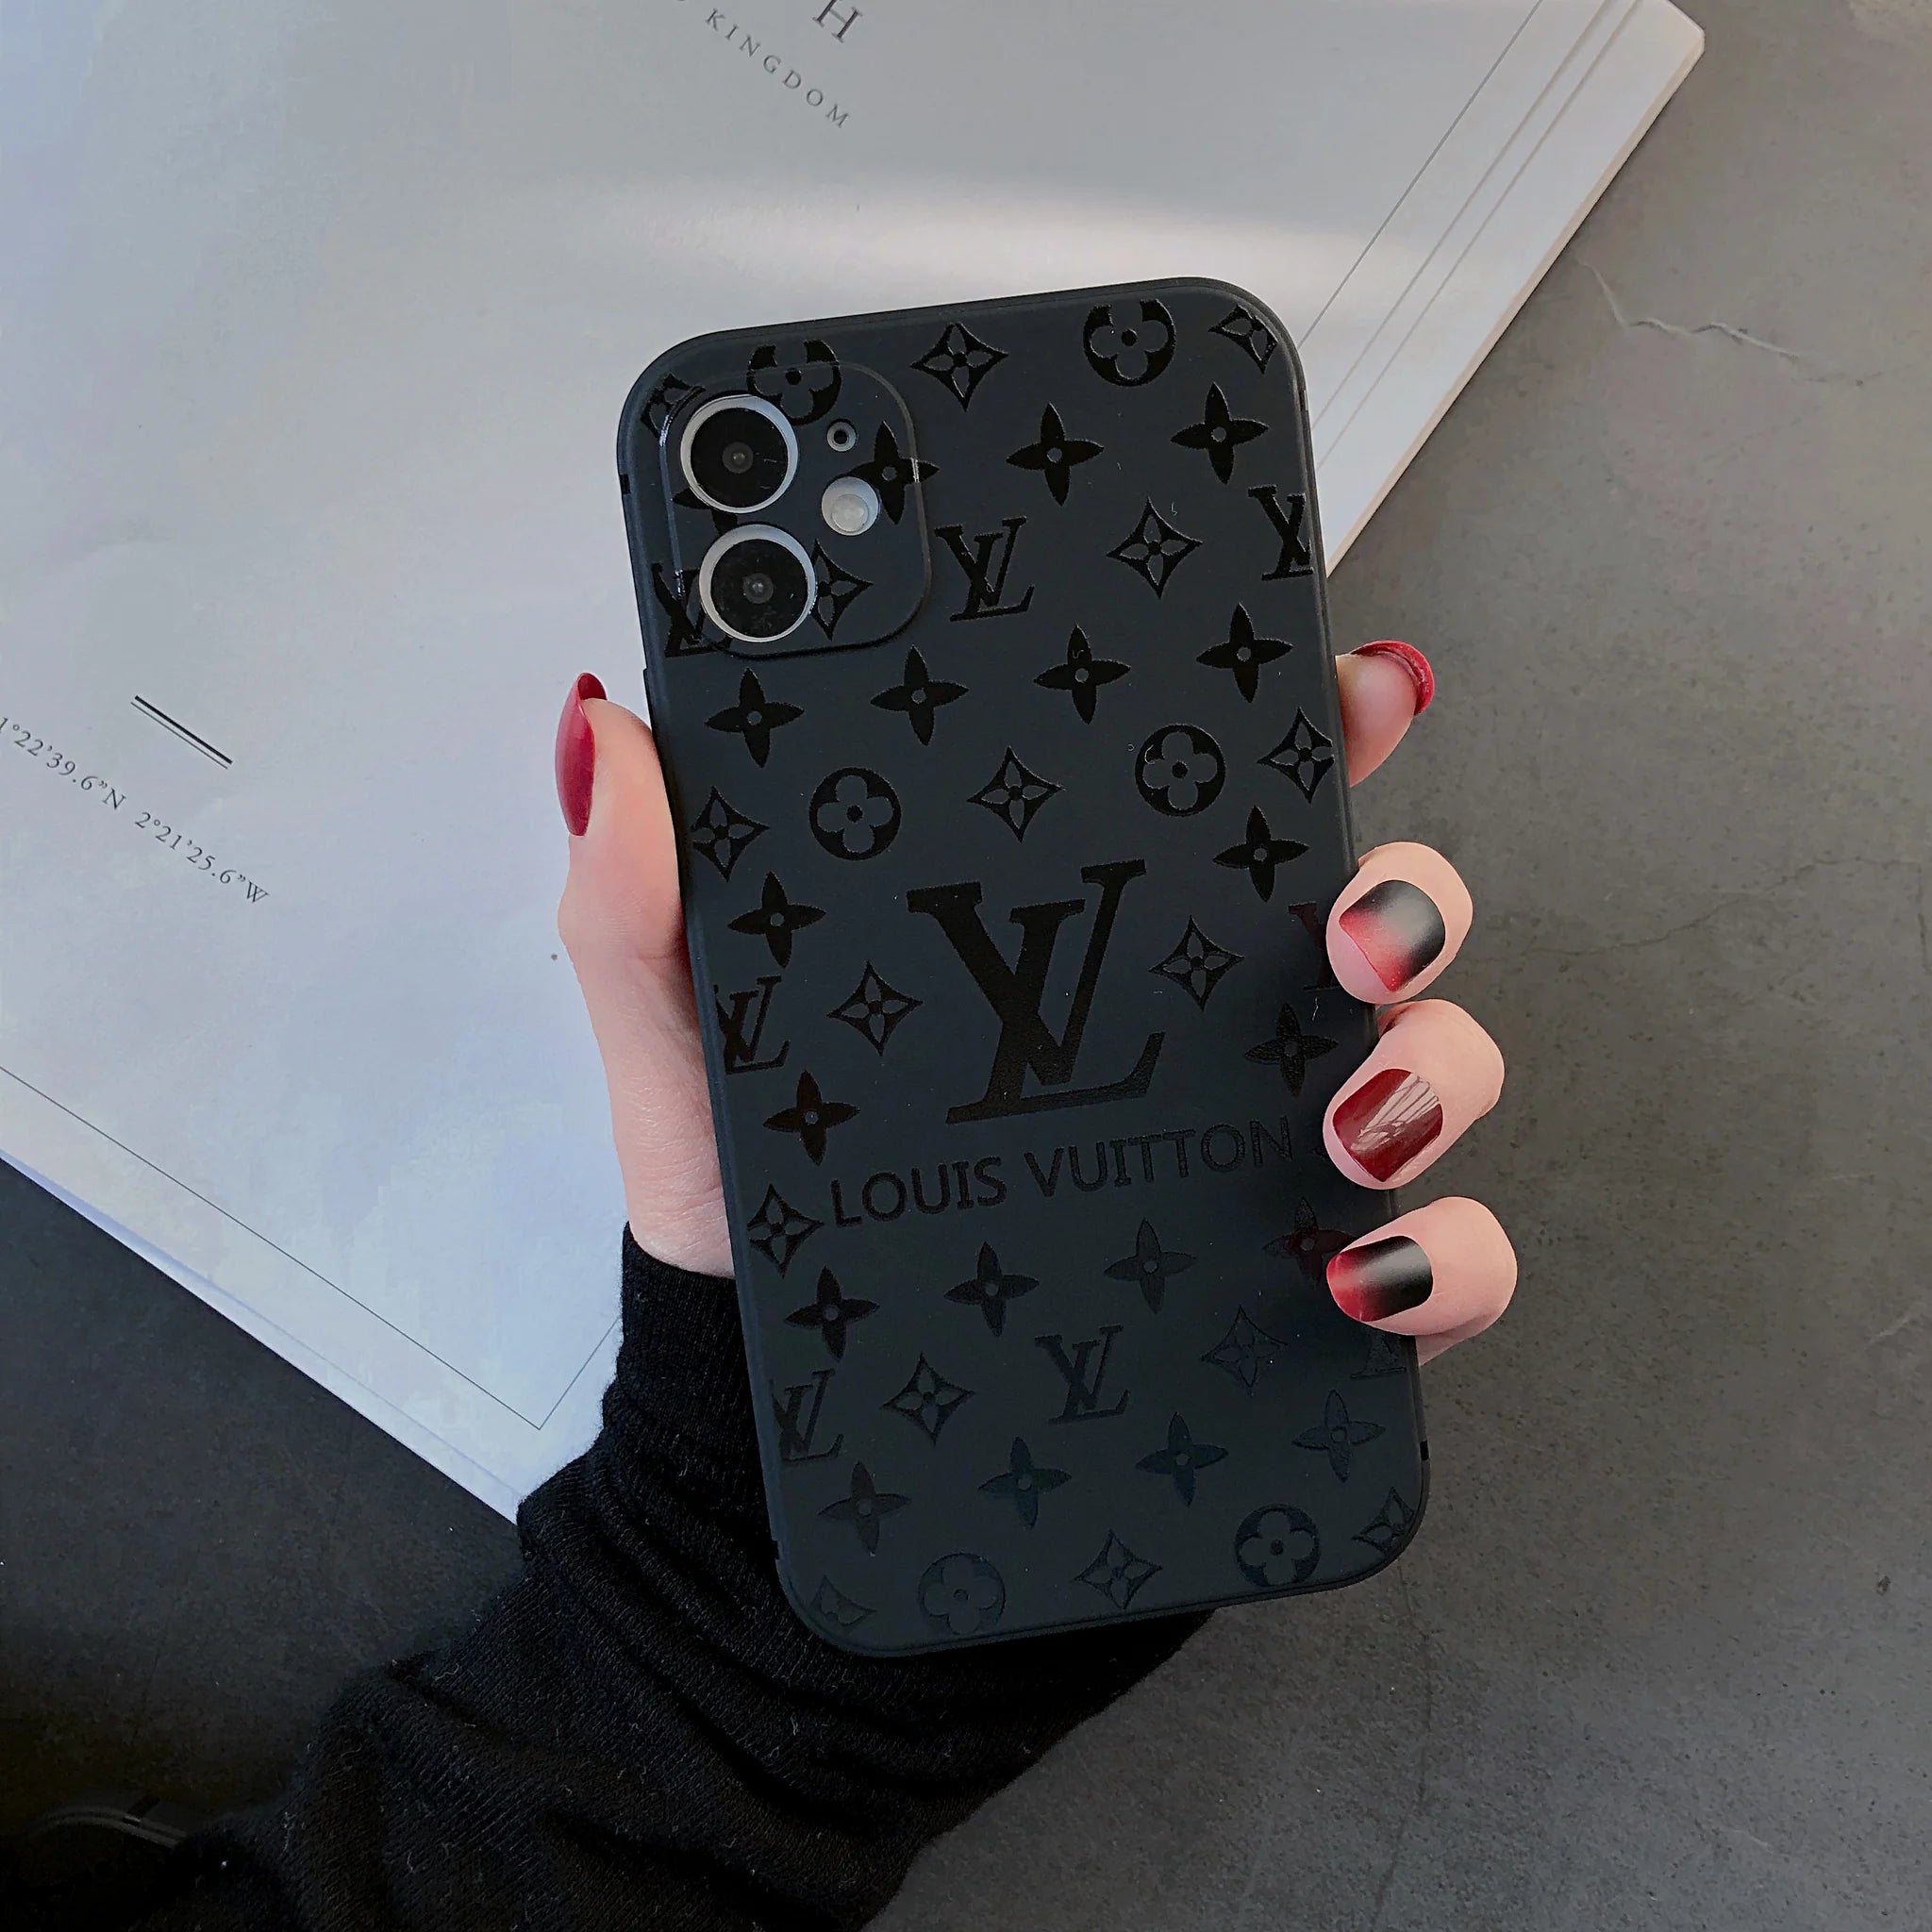 LV GLOSSY IPHONE CASES – Clifton Sperry